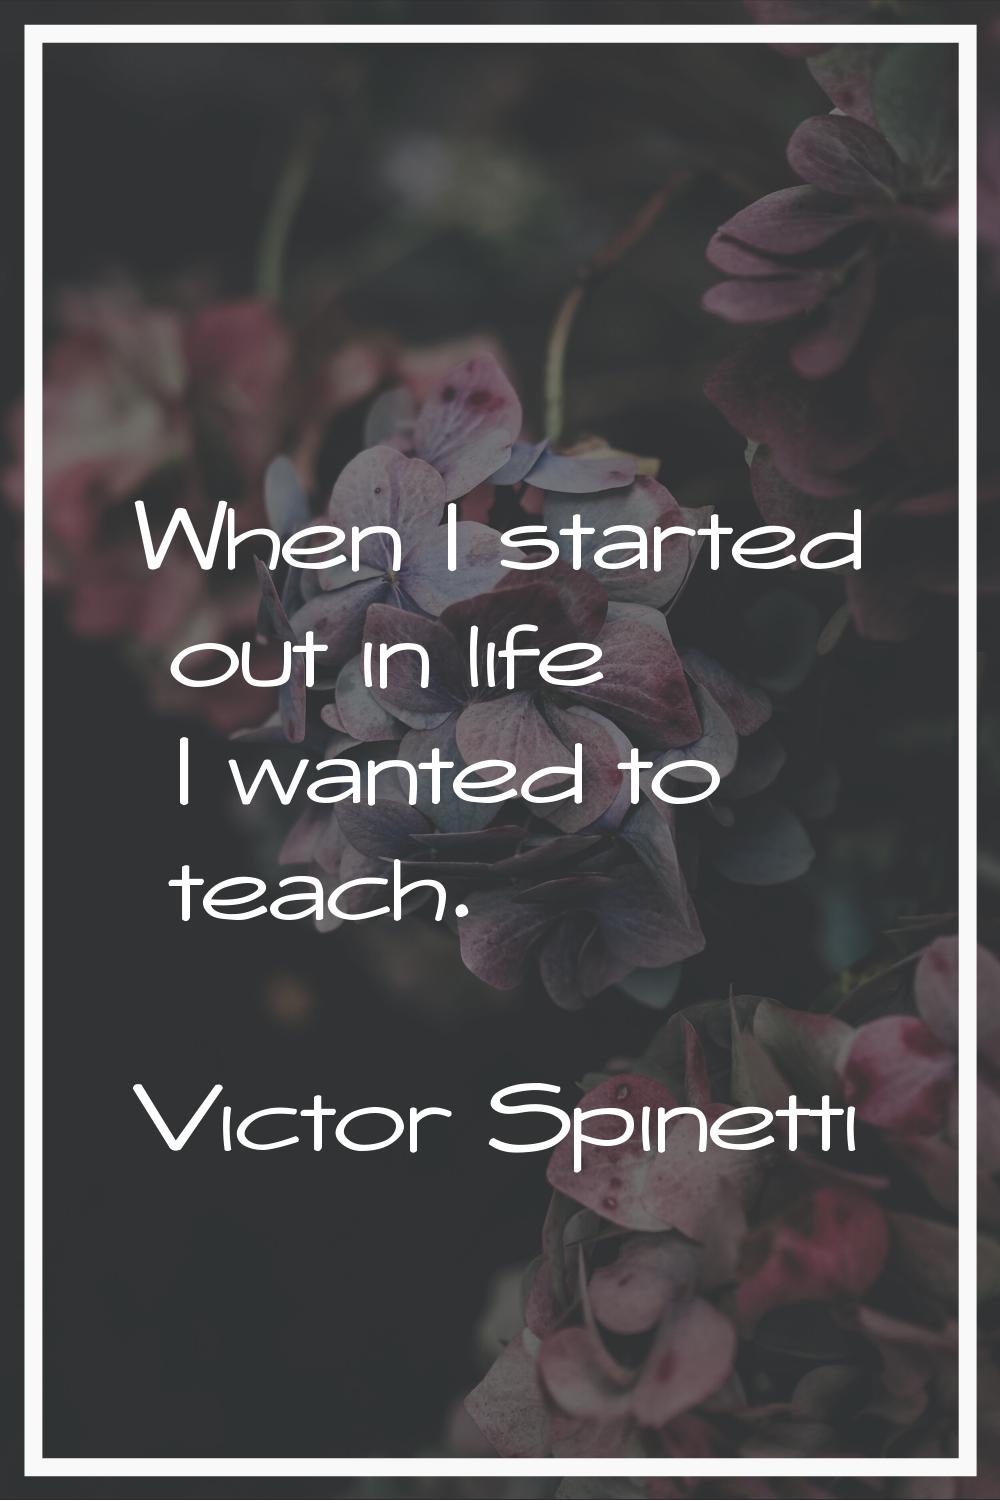 When I started out in life I wanted to teach.